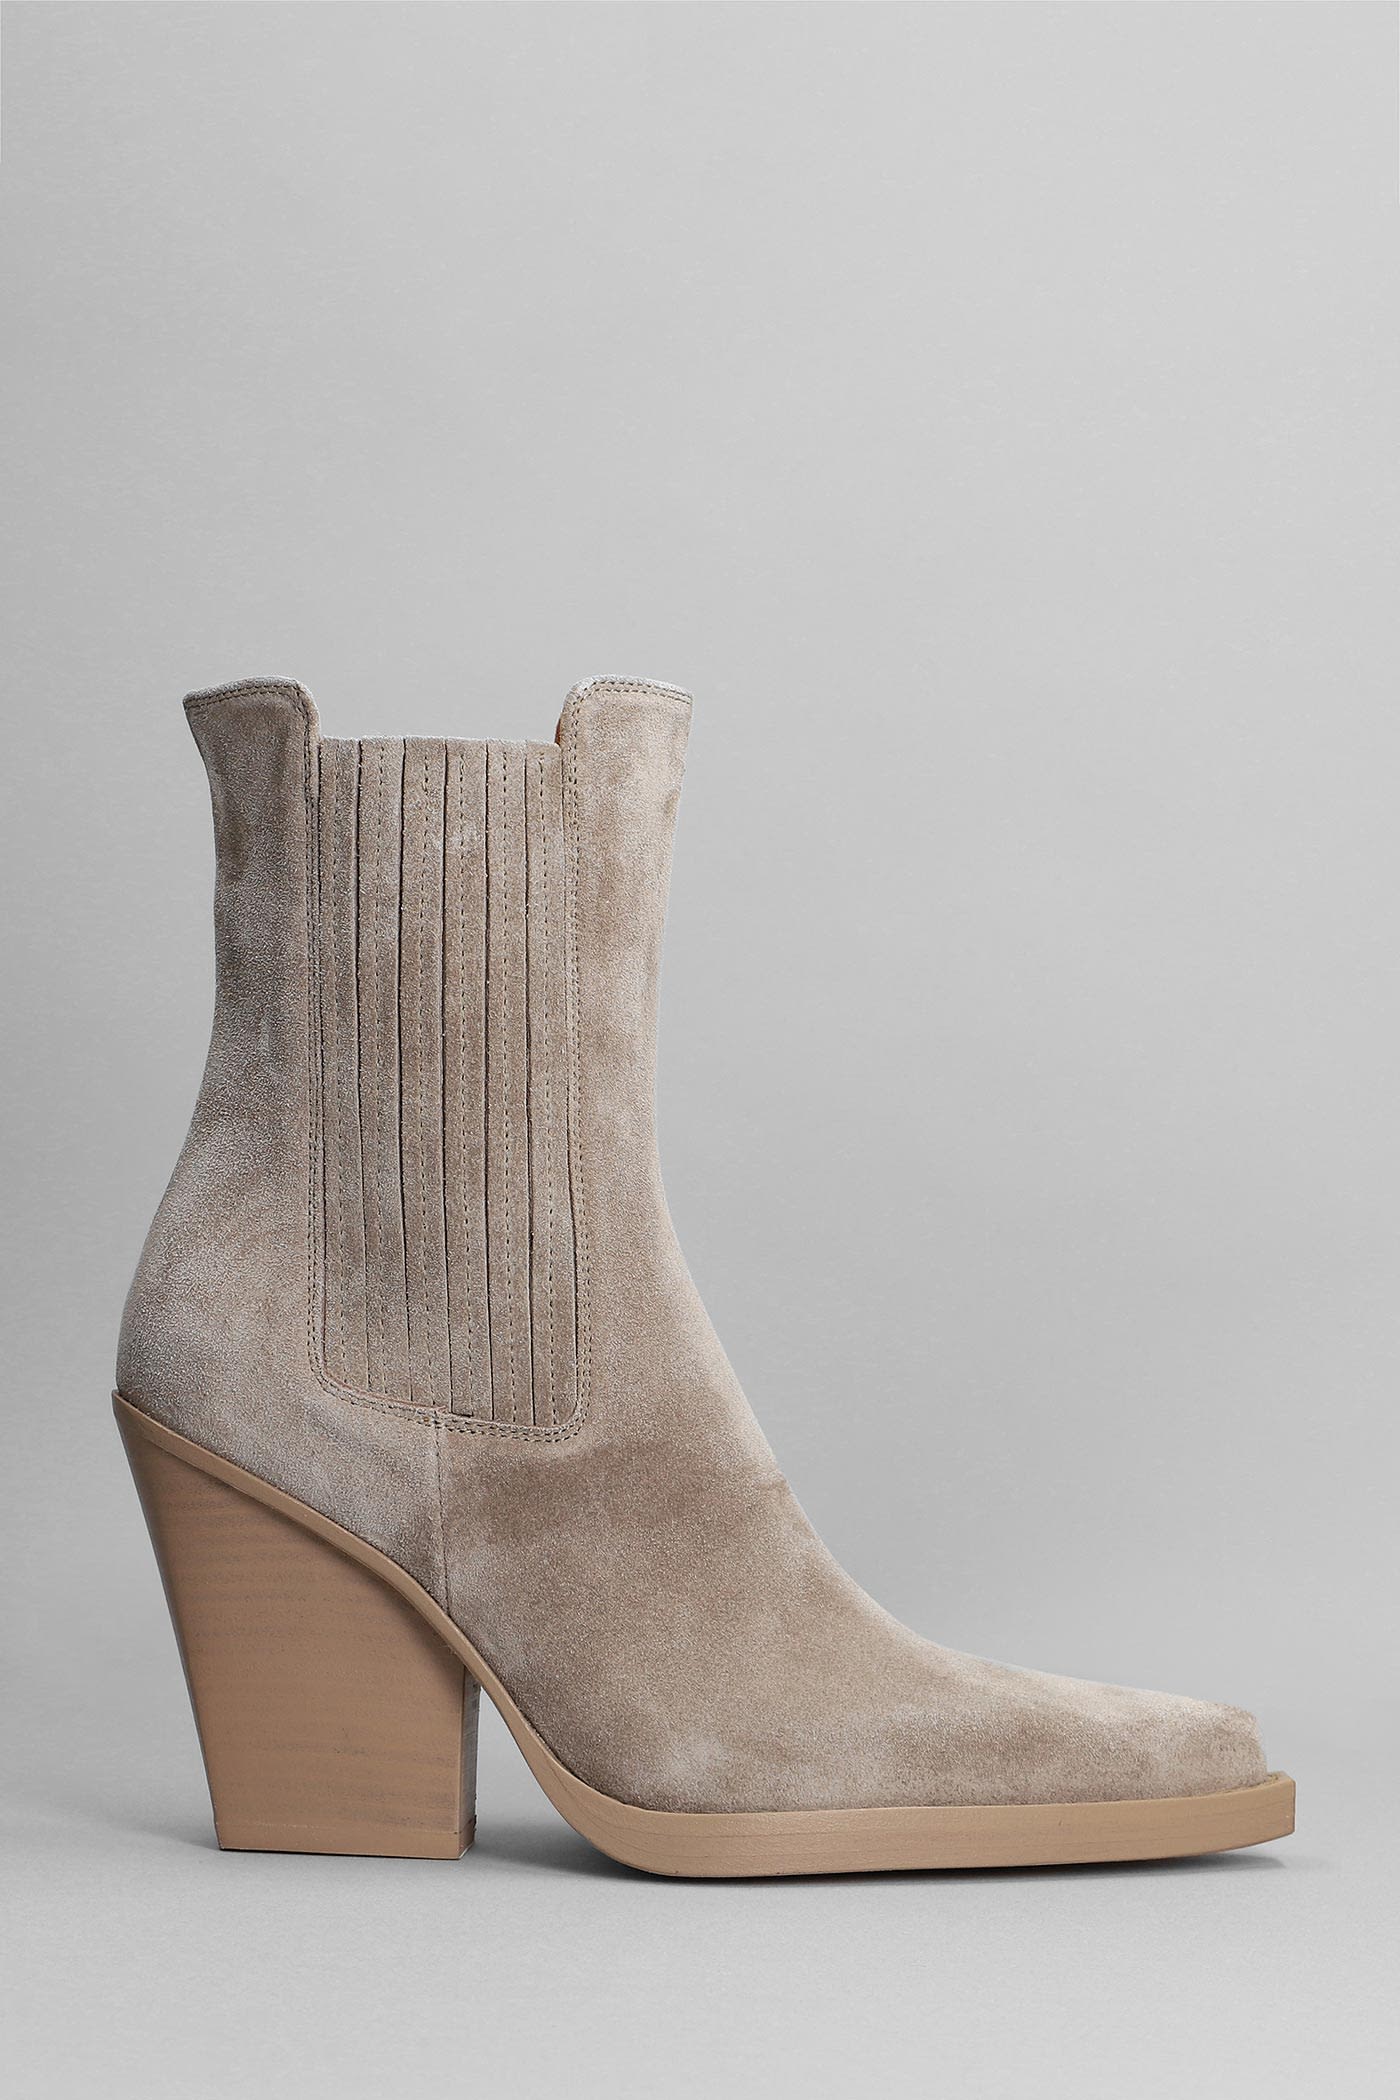 Paris Texas Dallas Texan Ankle Boots In Taupe Suede